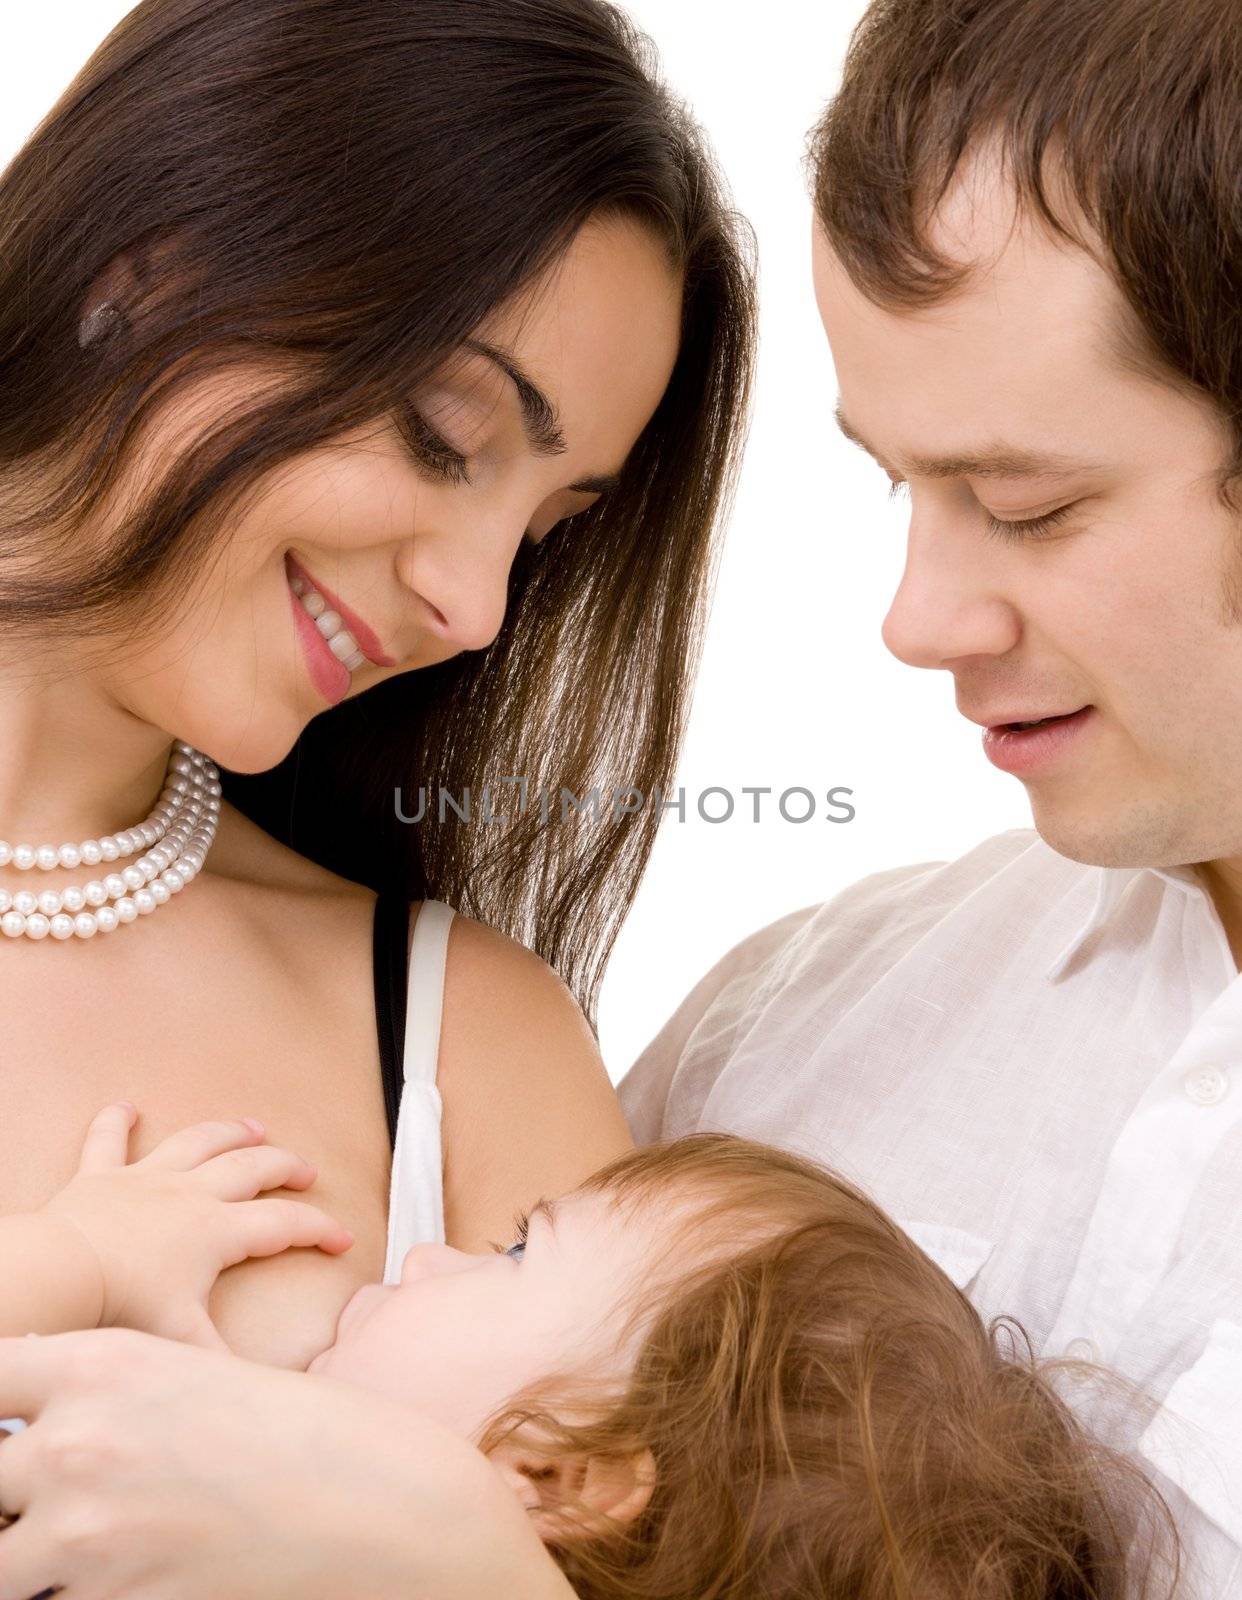 bright picture of happy family over white (focus on mother)